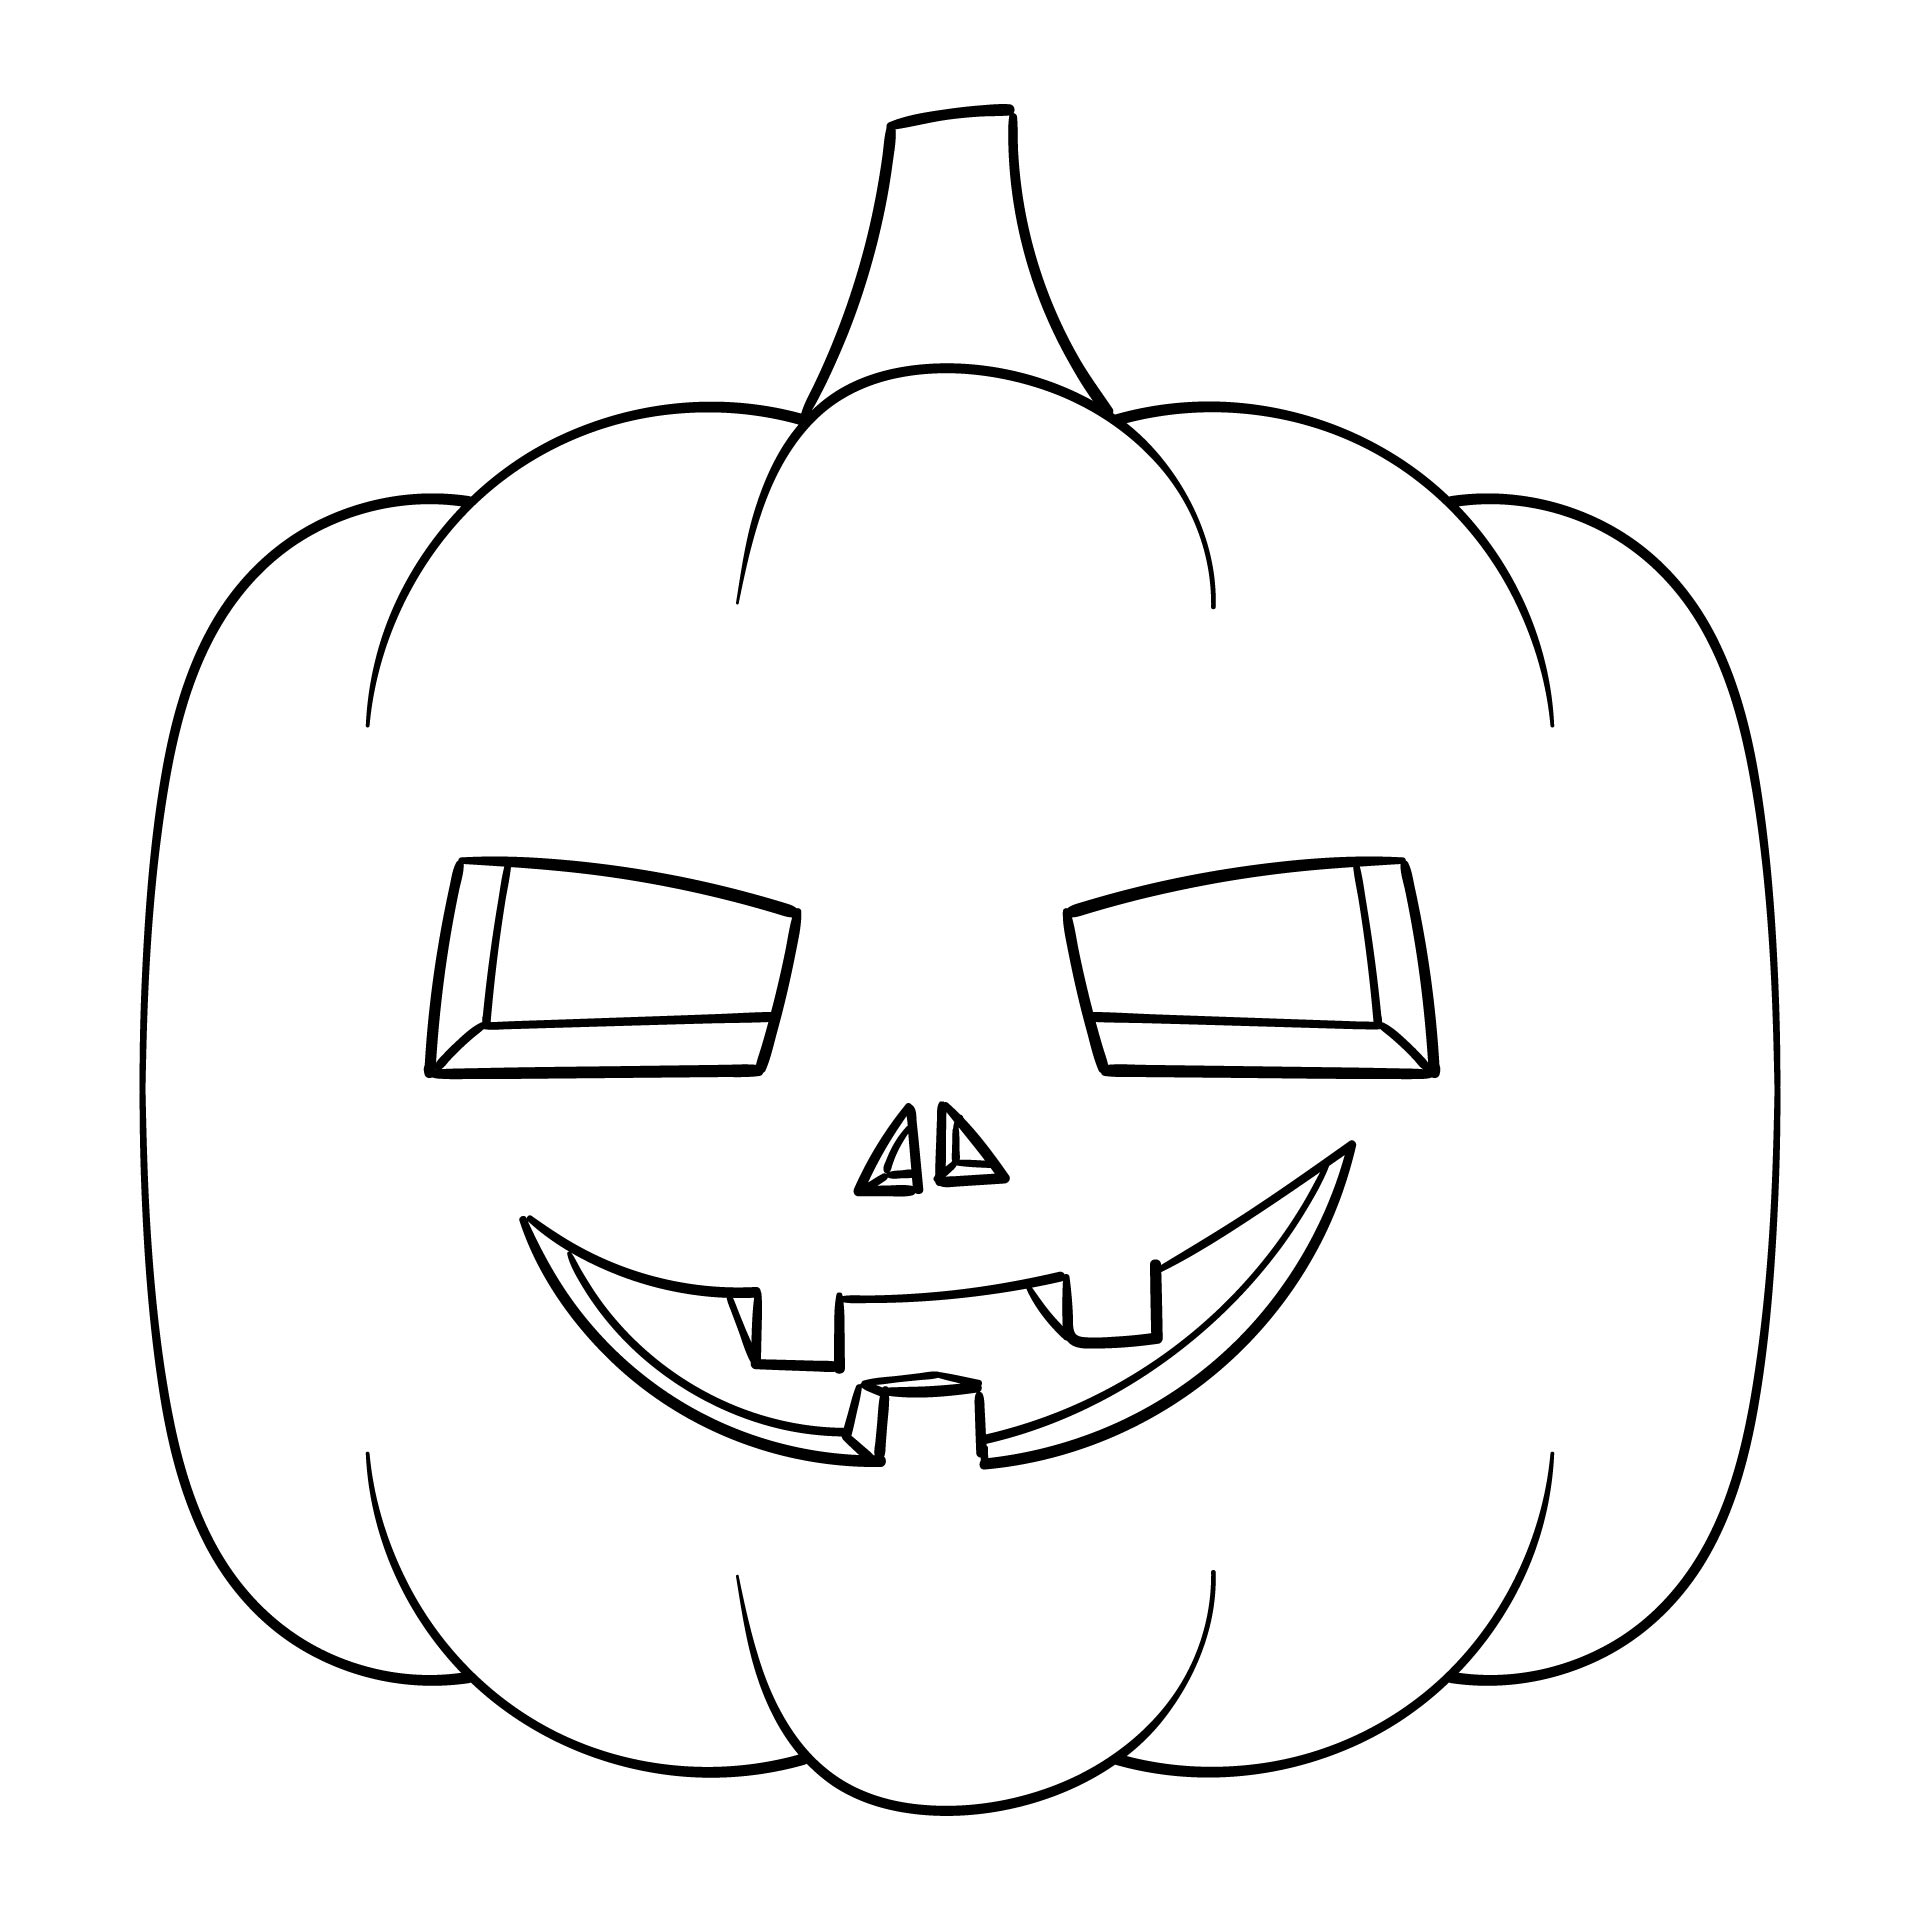 Happy Halloween Pumpkin Coloring Pages